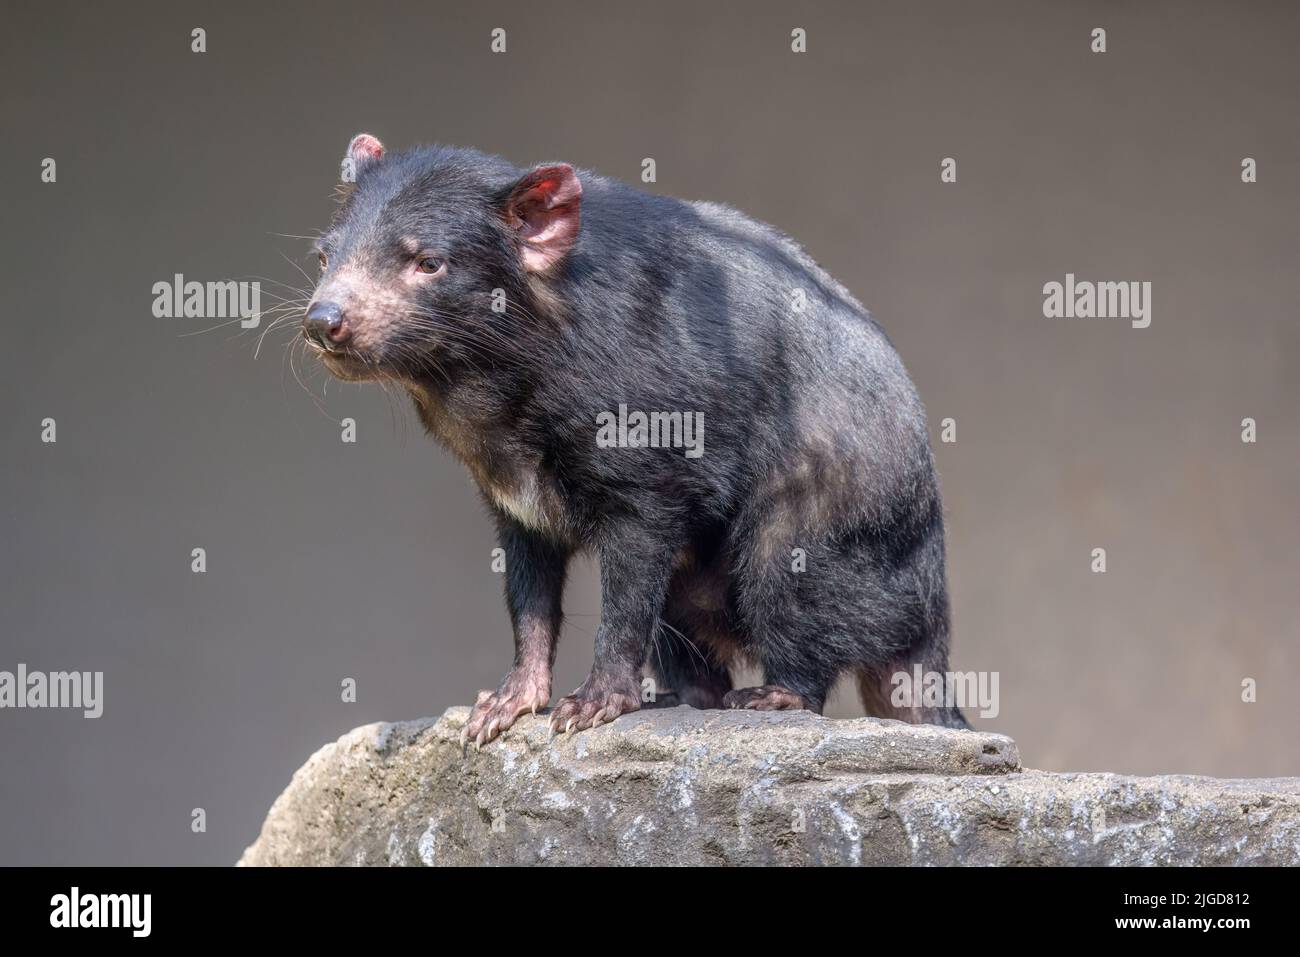 Tasmanian Devil (Sarcophilus harrisii) looking ahead. They are the world’s largest carnivorous marsupials. Stock Photo